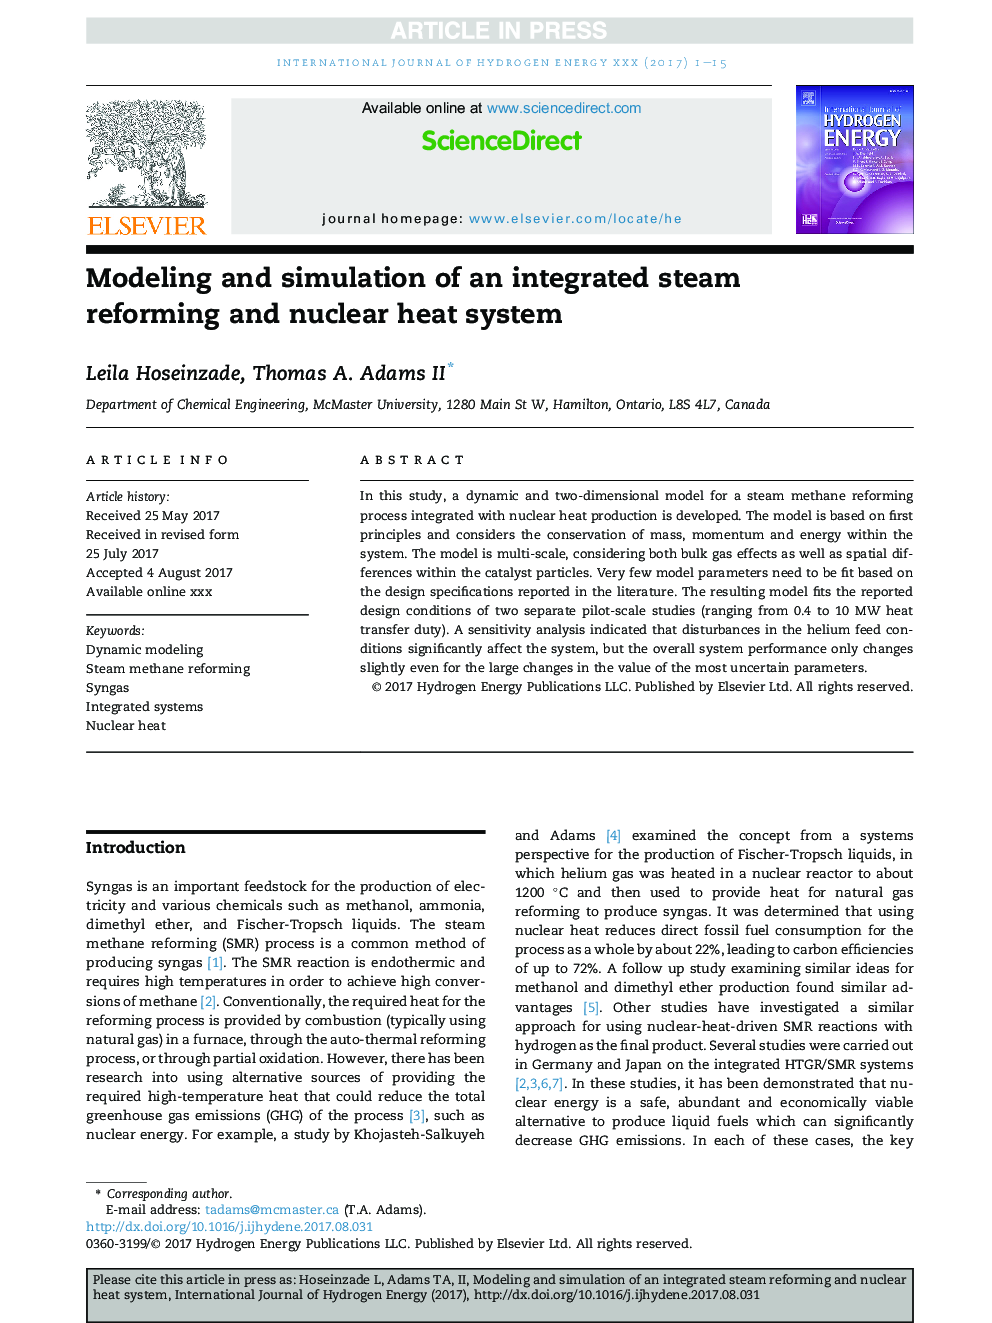 Modeling and simulation of an integrated steam reforming and nuclear heat system